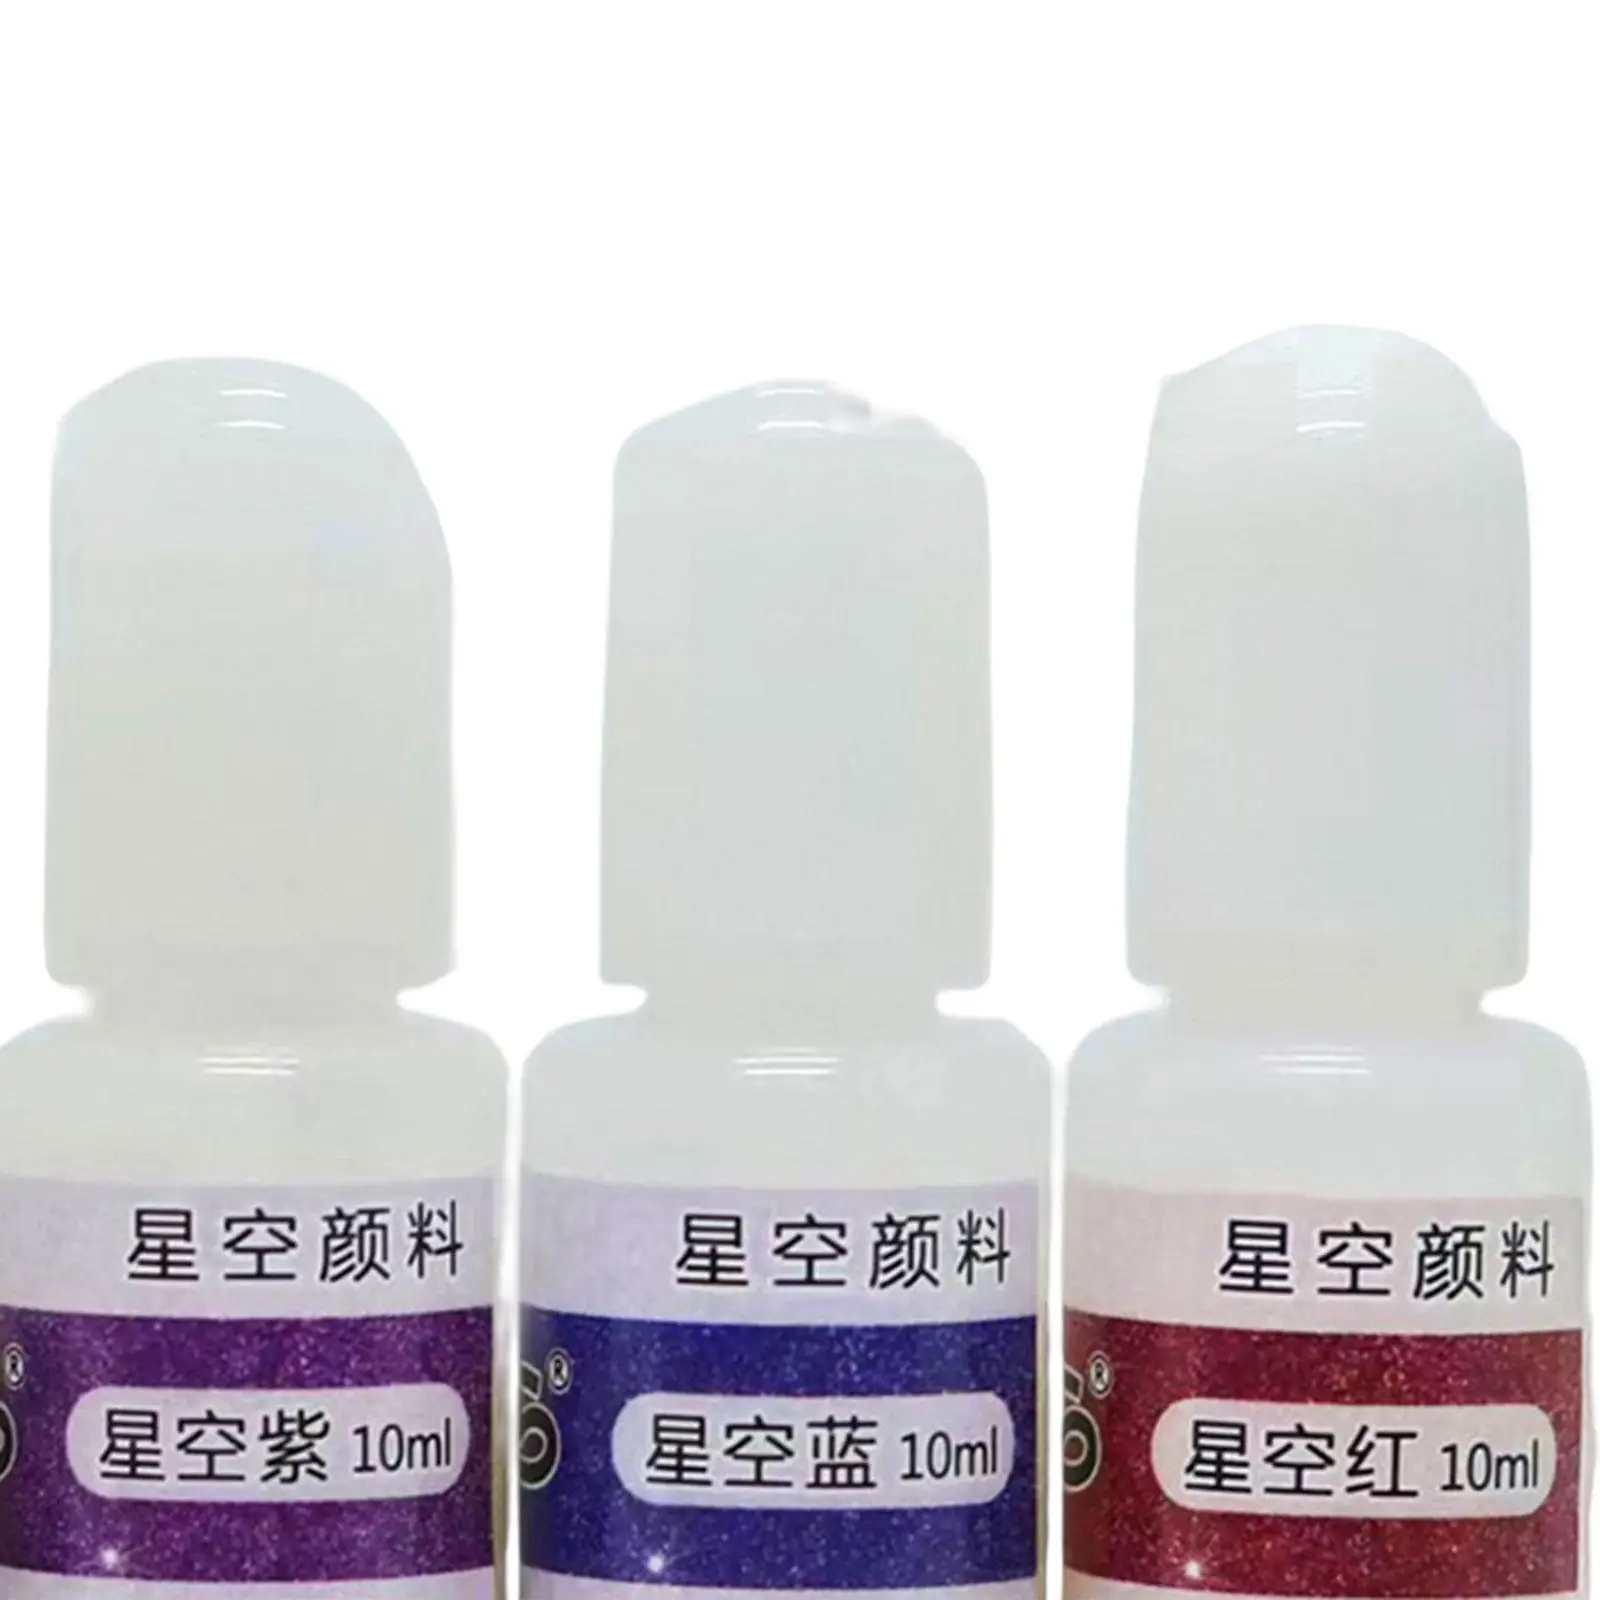 5 Pieces Epoxy Resin Pigment DIY Crafts Artwork Concentrated Resin Colorant